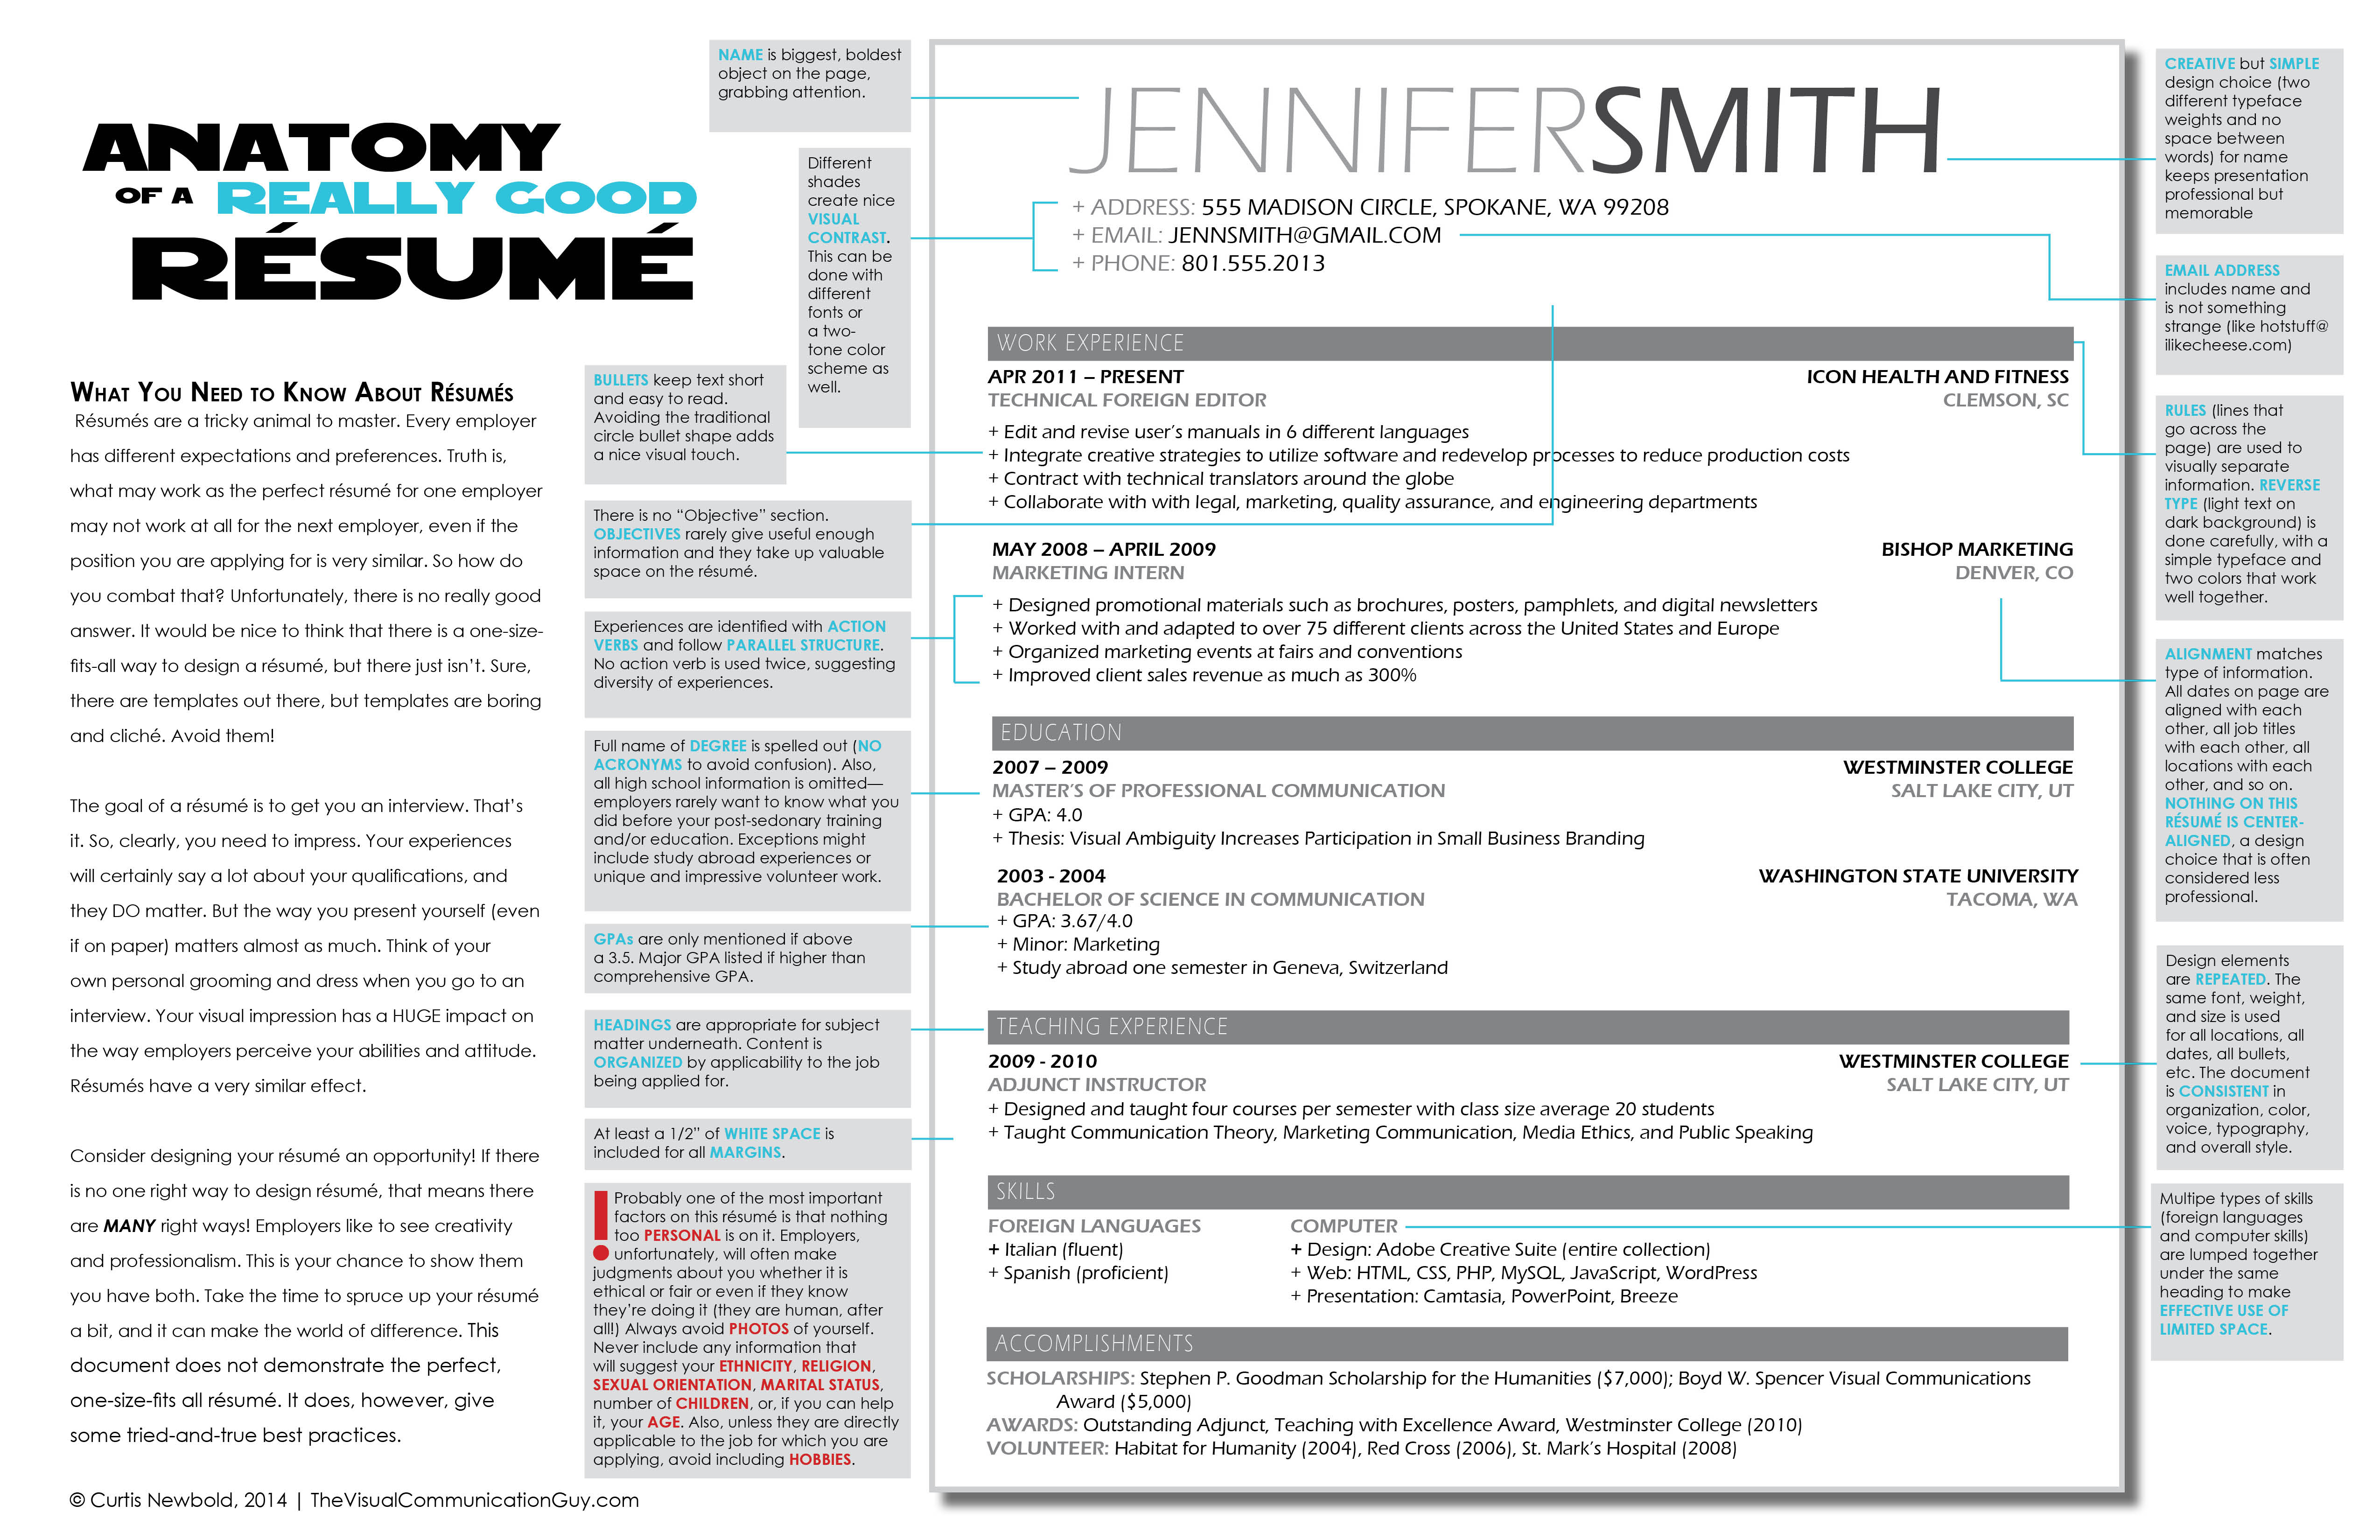 Great Resume Examples The Anatomy Of A Really Good Rsum A Good Rsum Example The